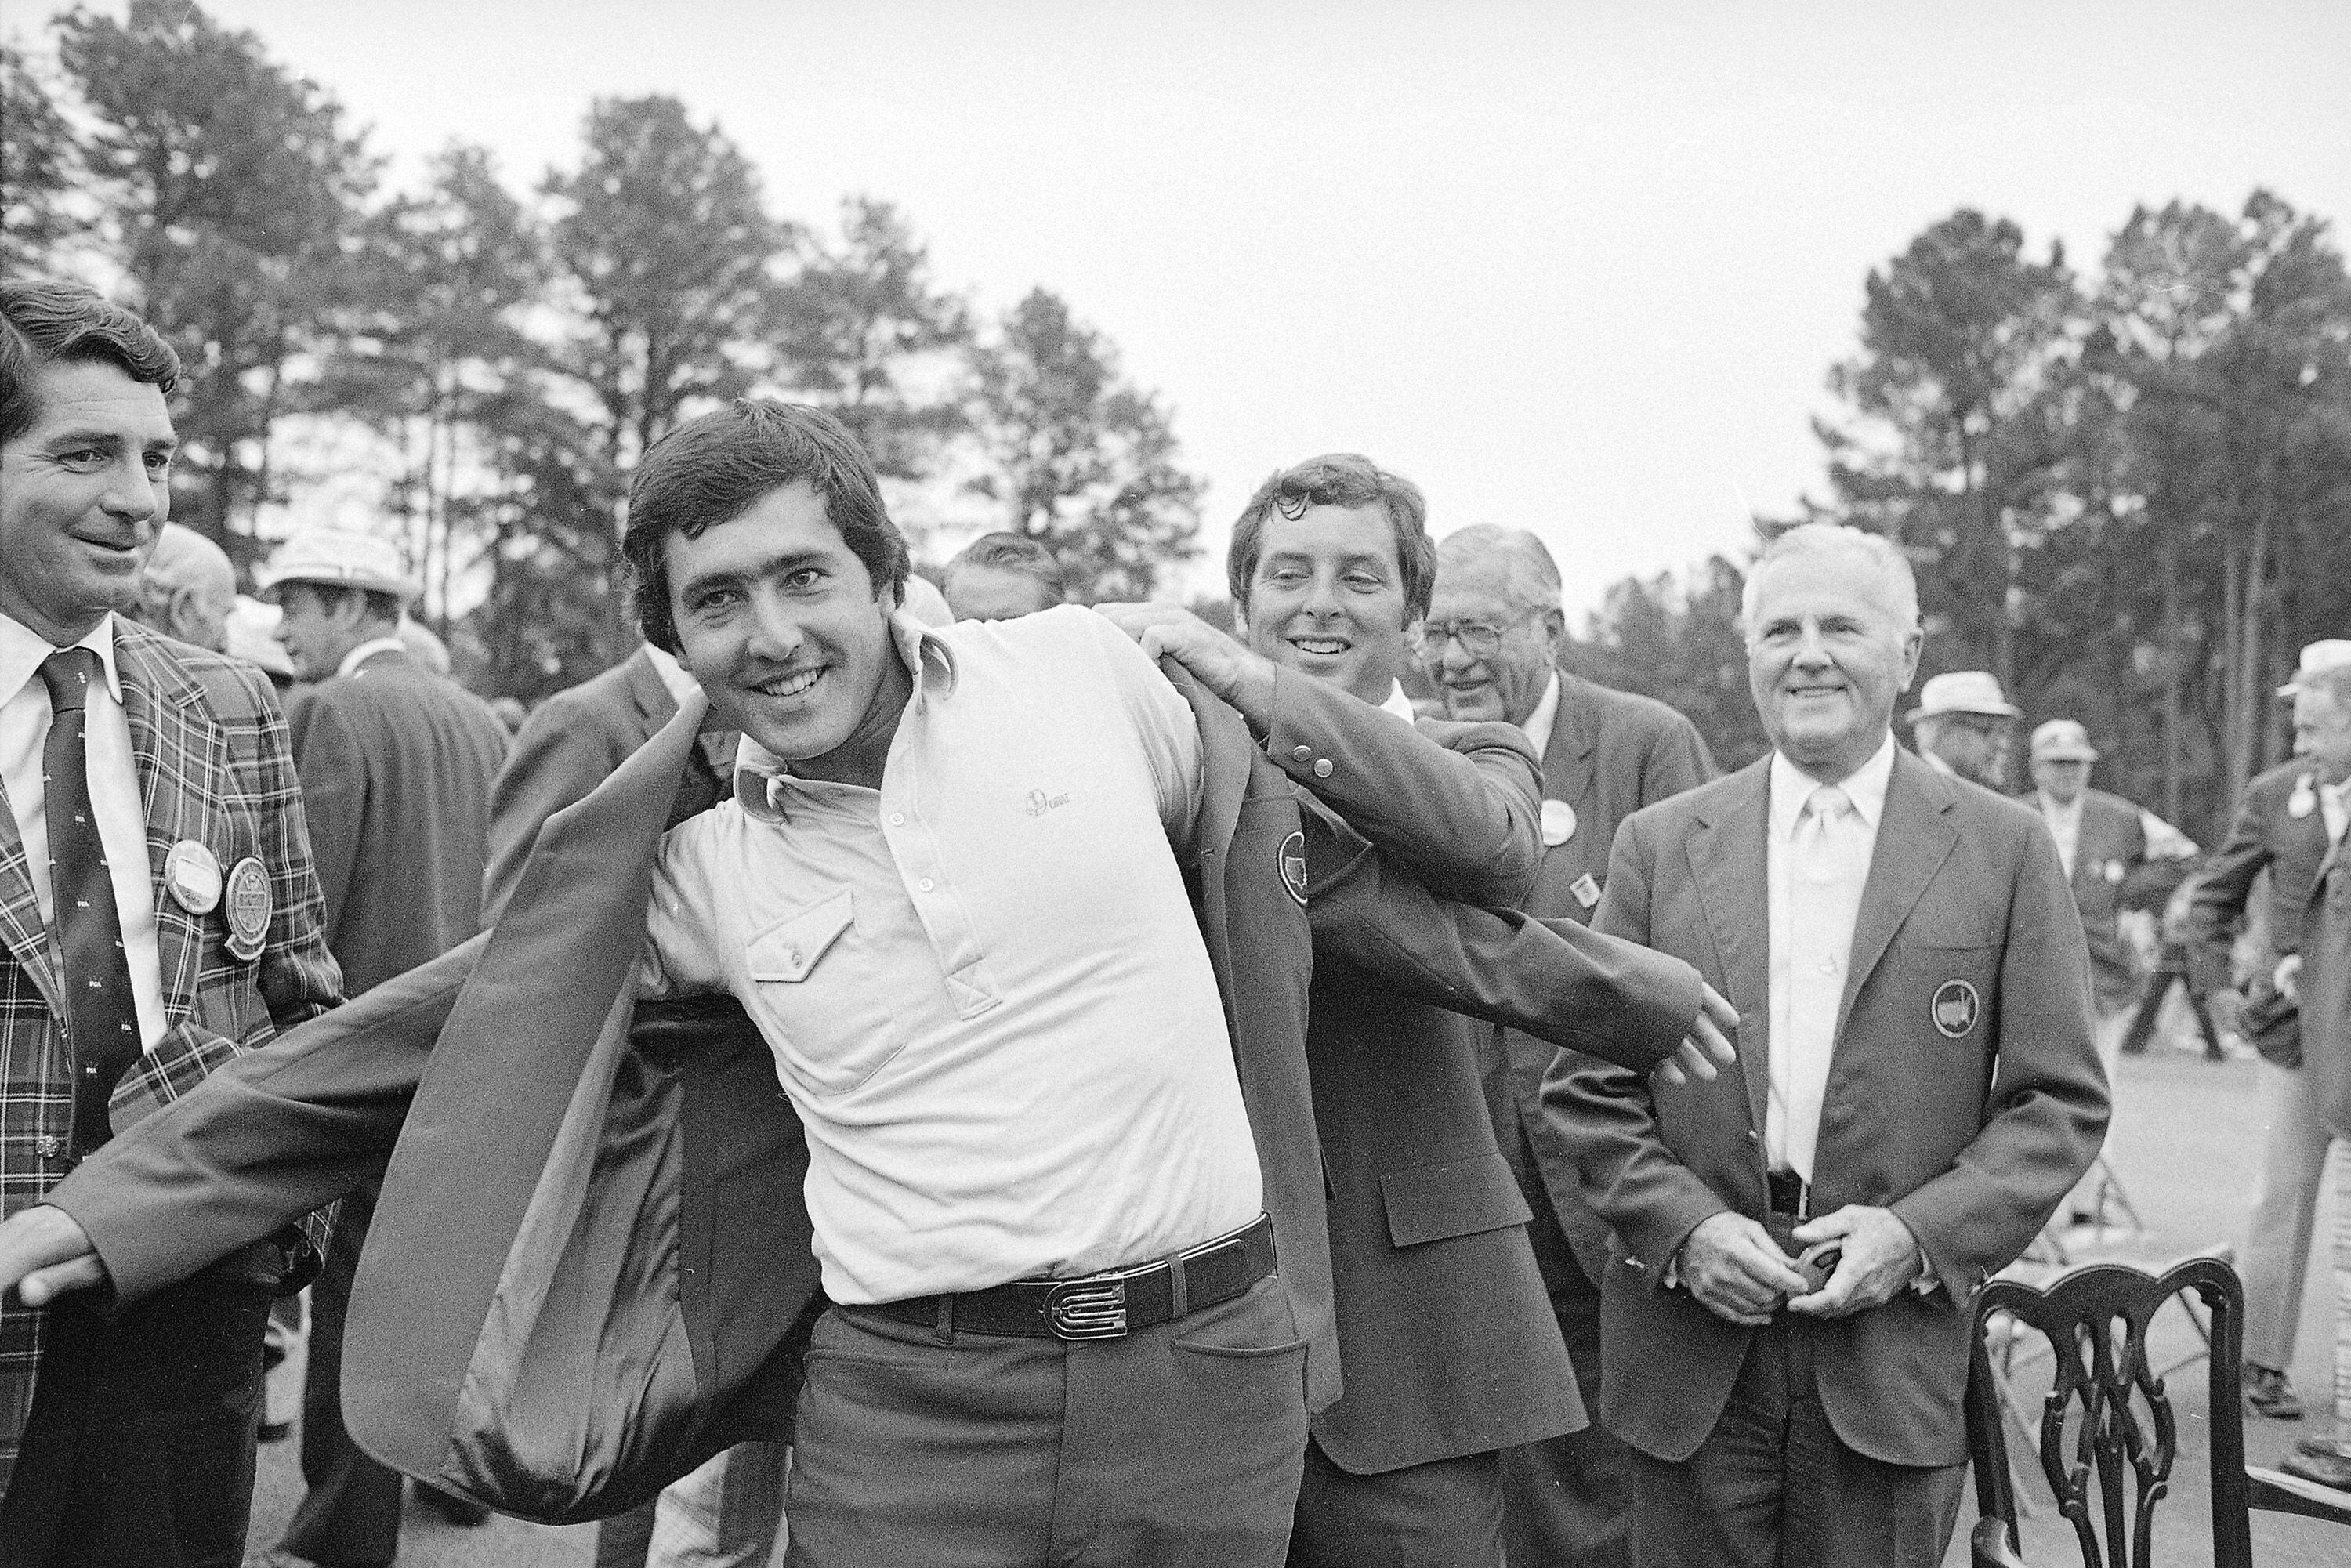 Severiano Ballesteros, winner of the 1980 Masters title at the Augusta National Golf Club, receives the Green Coat from last year's winner, Fuzzy Zoeller, April 14, 1980